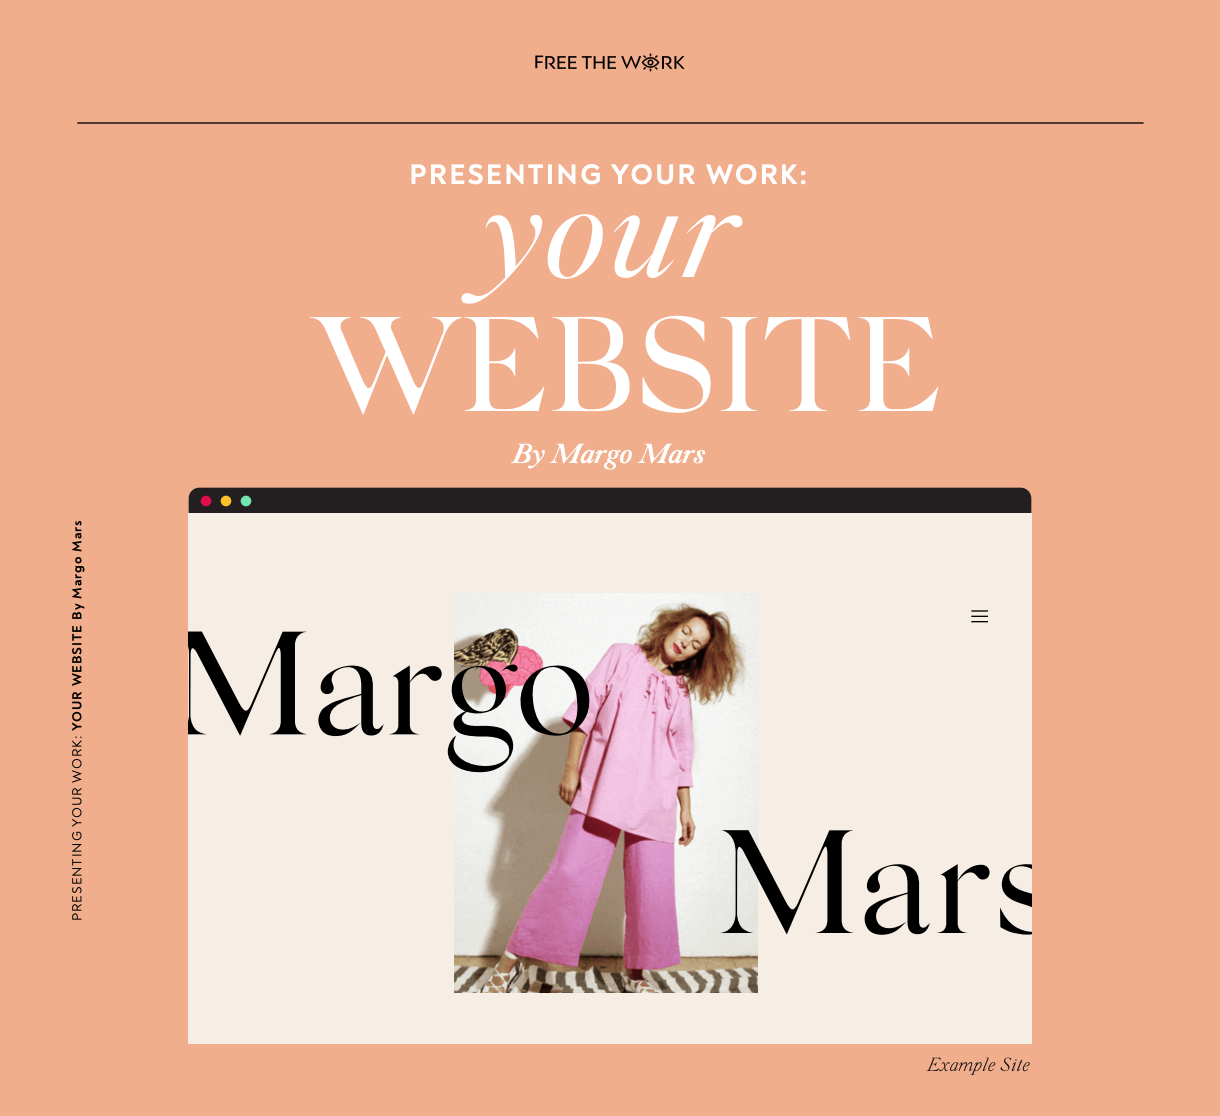 Free The Work first 'How-to-Guide' by Margo Mars